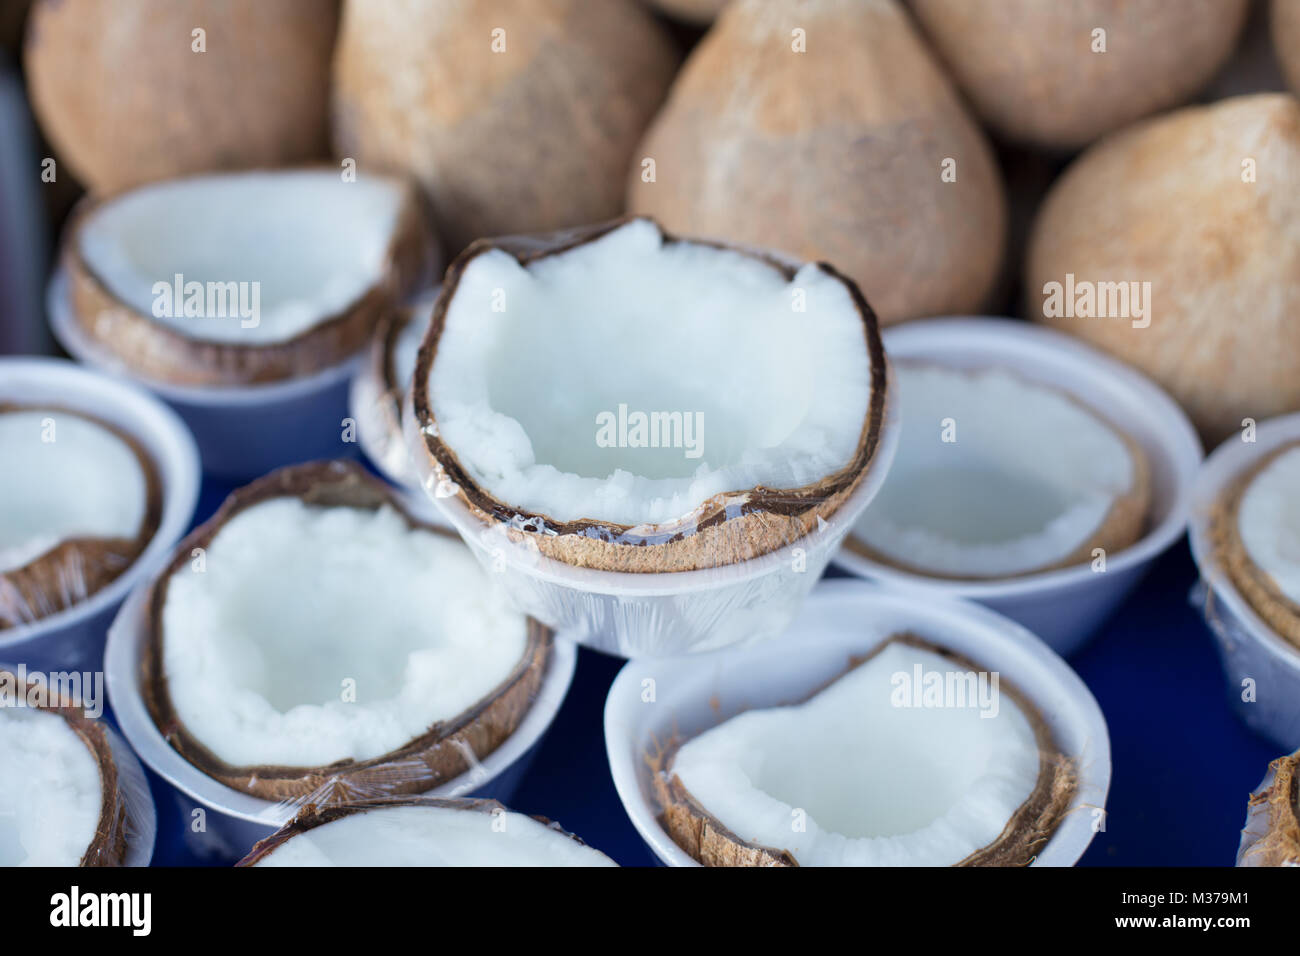 raw thick coconut meat good healthy food high nutrition and benefits fruit Stock Photo